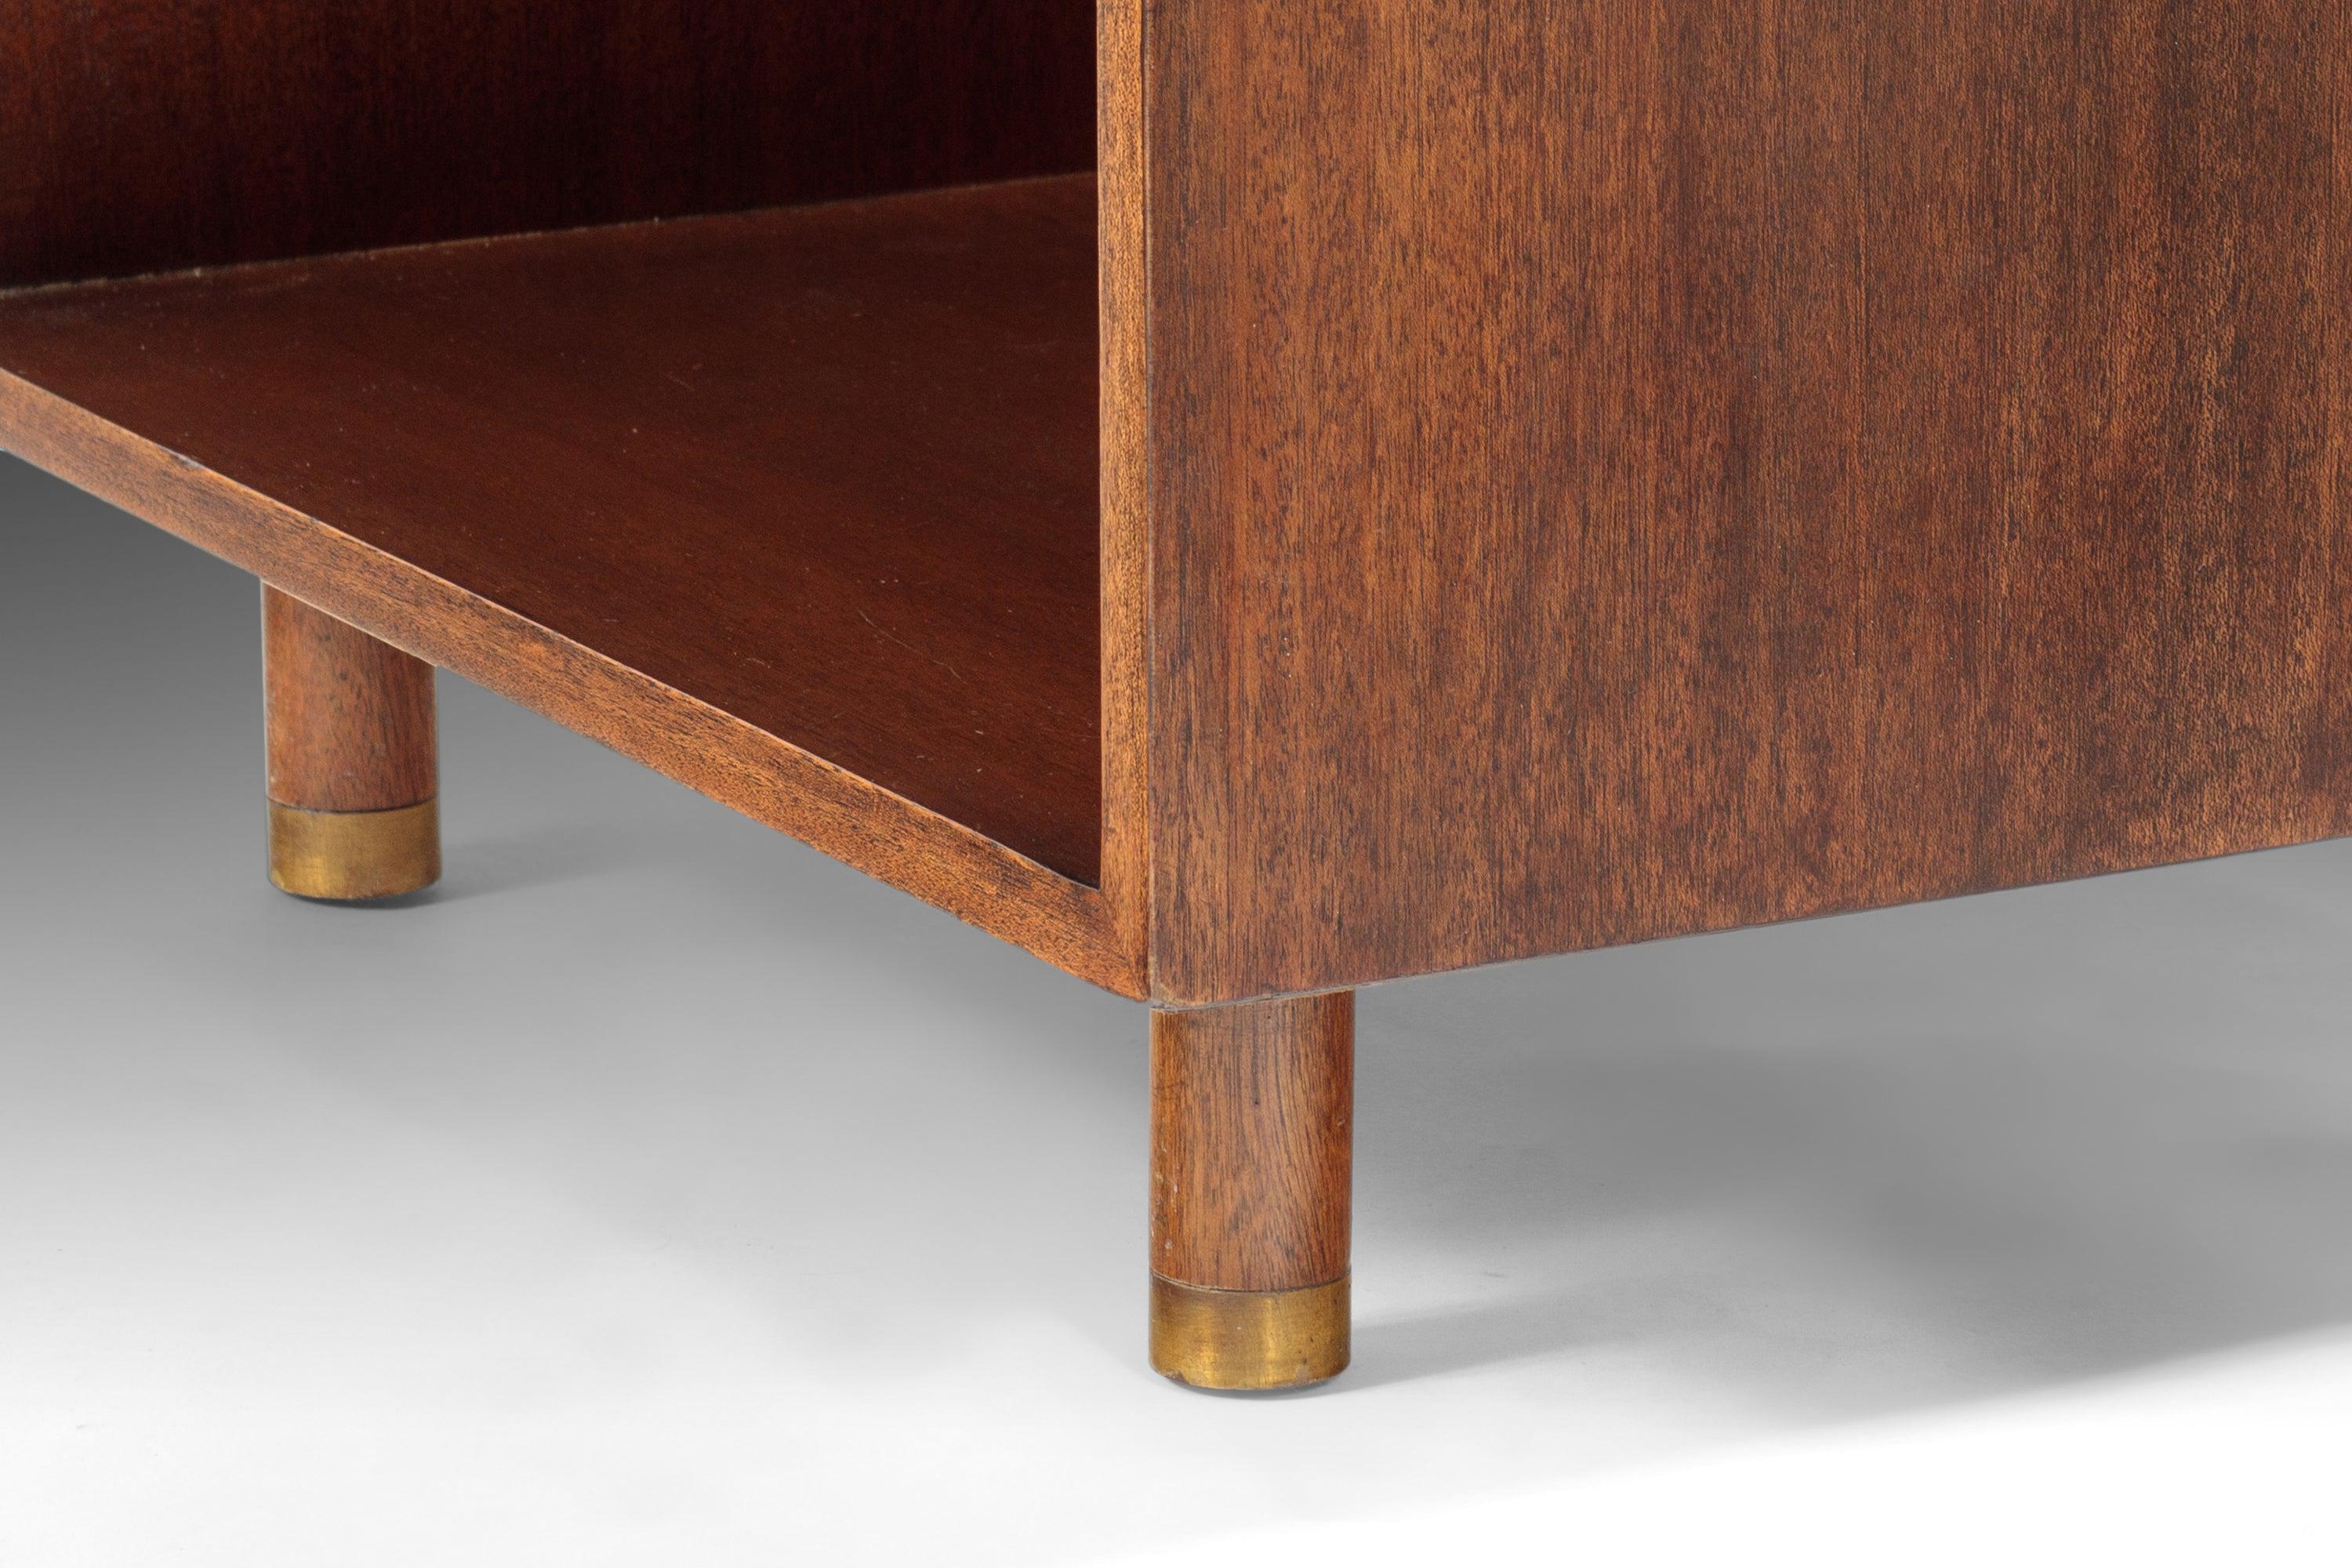 Set of Two '2' Mid-Century Modern End Tables in Mahogany by Harvey Probber, 1960 For Sale 4